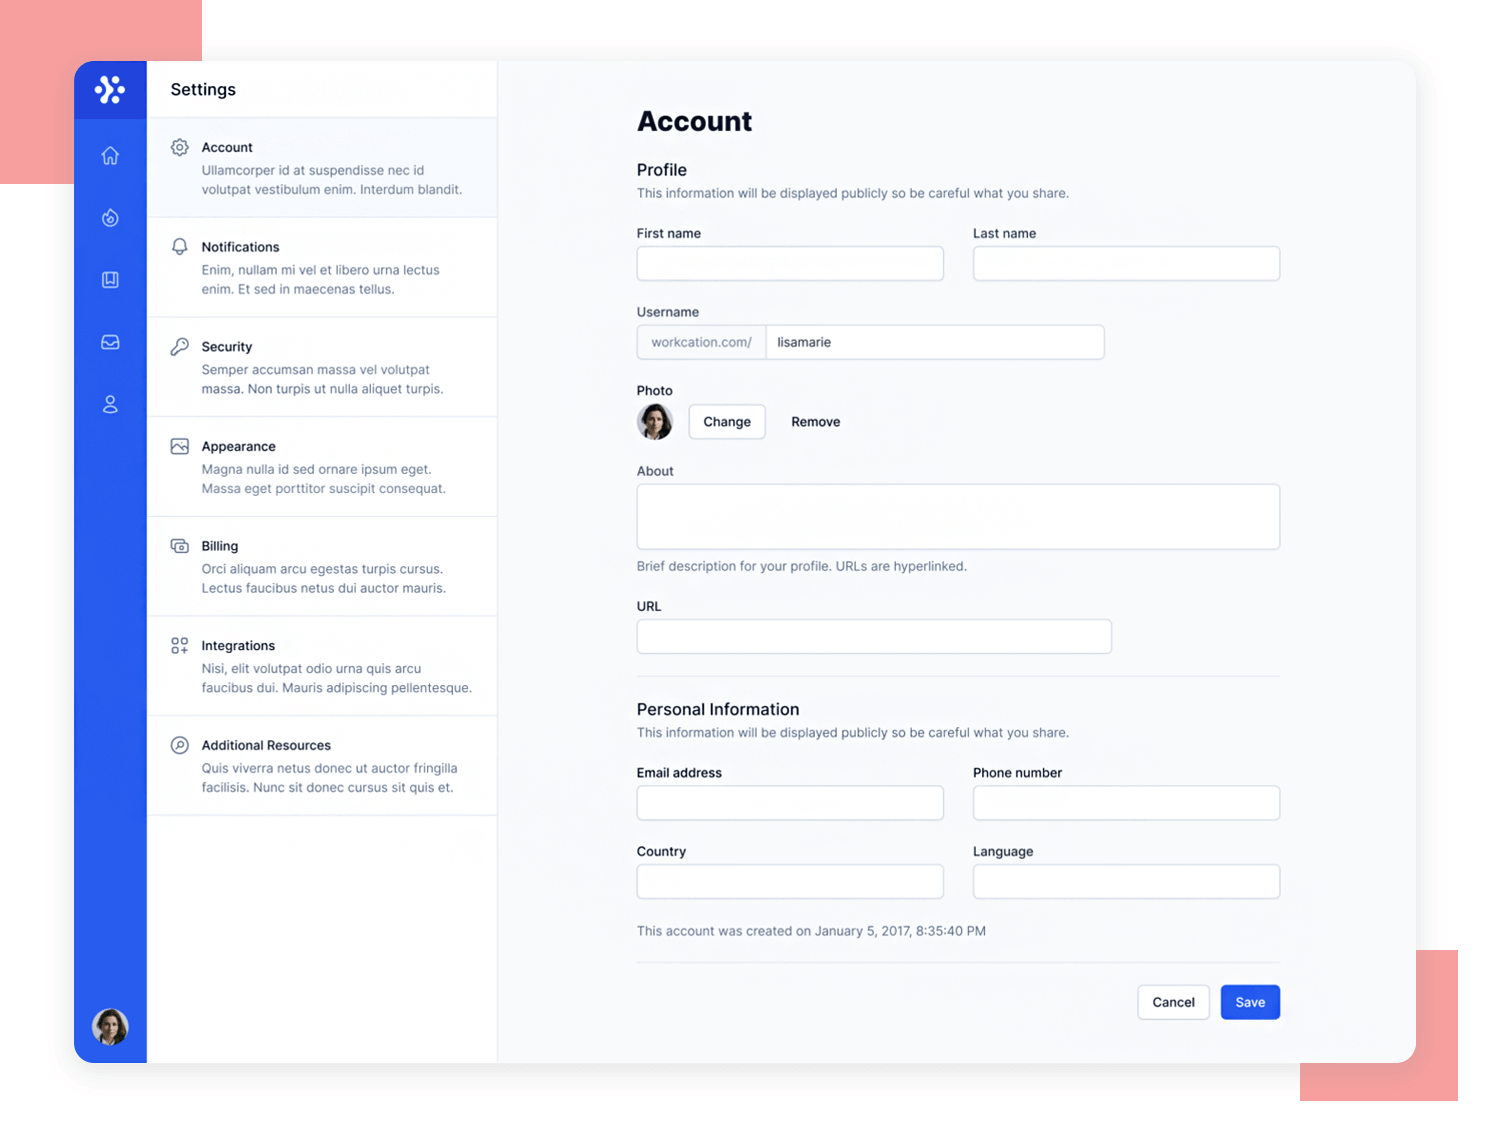 example of settings page in low fidelity wireframe